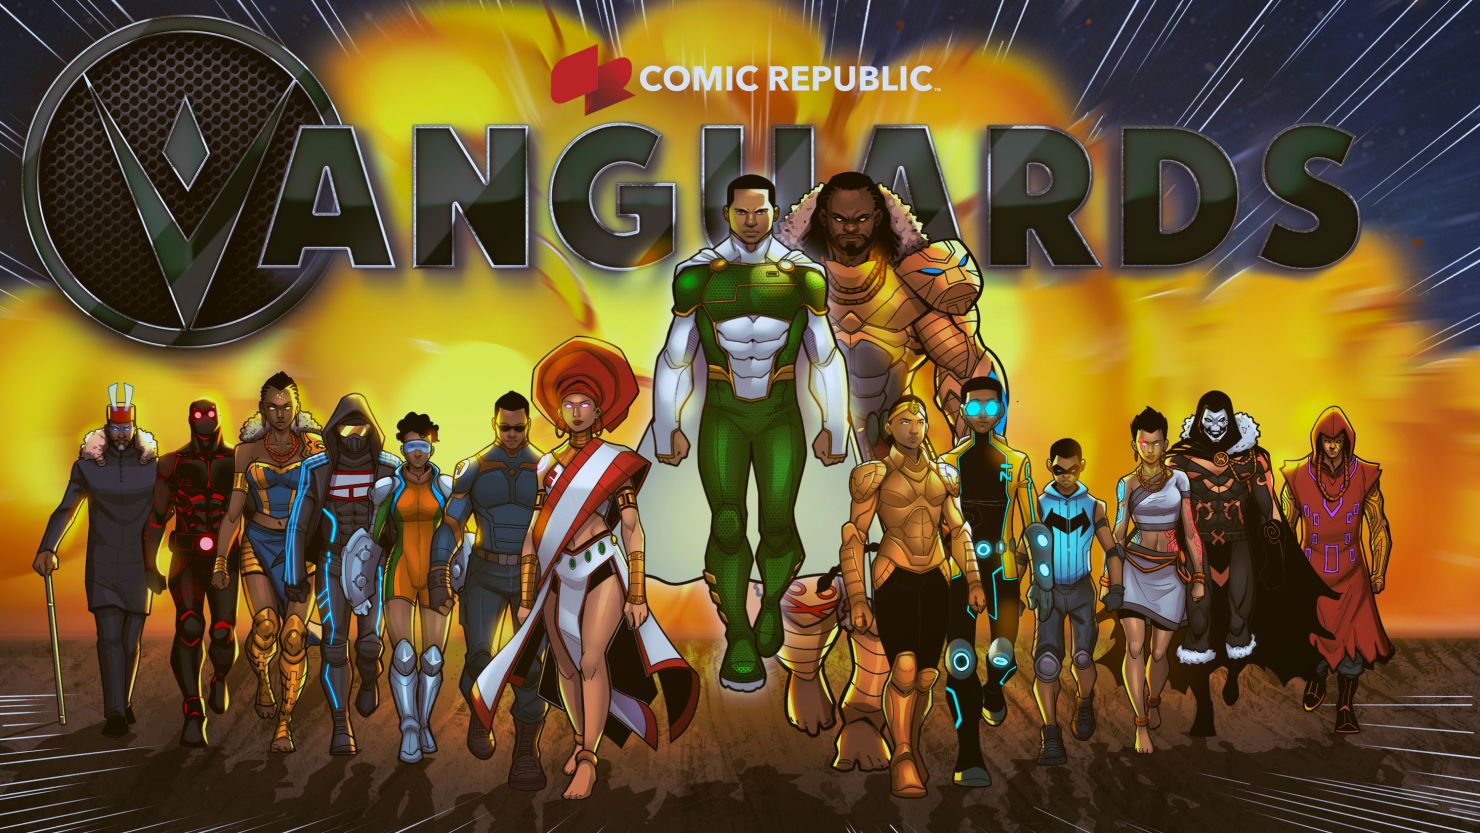 Comic Republic's "Vanguards" will be developed into a television series thanks to a new deal with UCP.